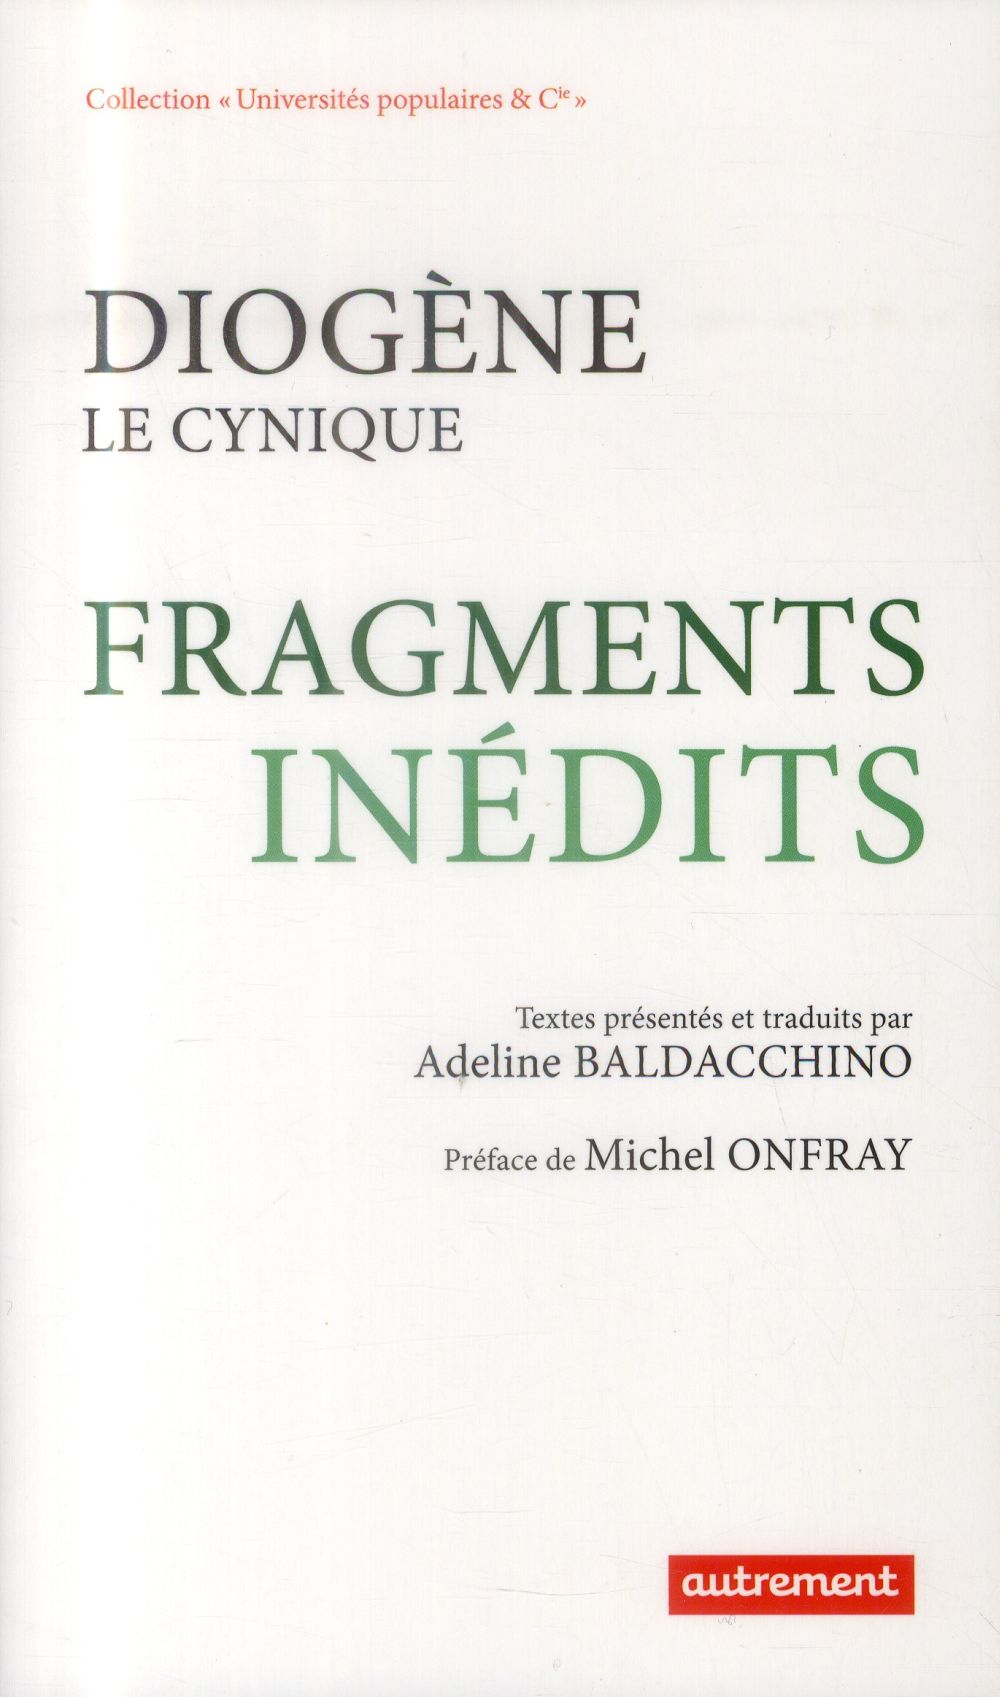 DIOGENE LE CYNIQUE - FRAGMENTS INEDITS